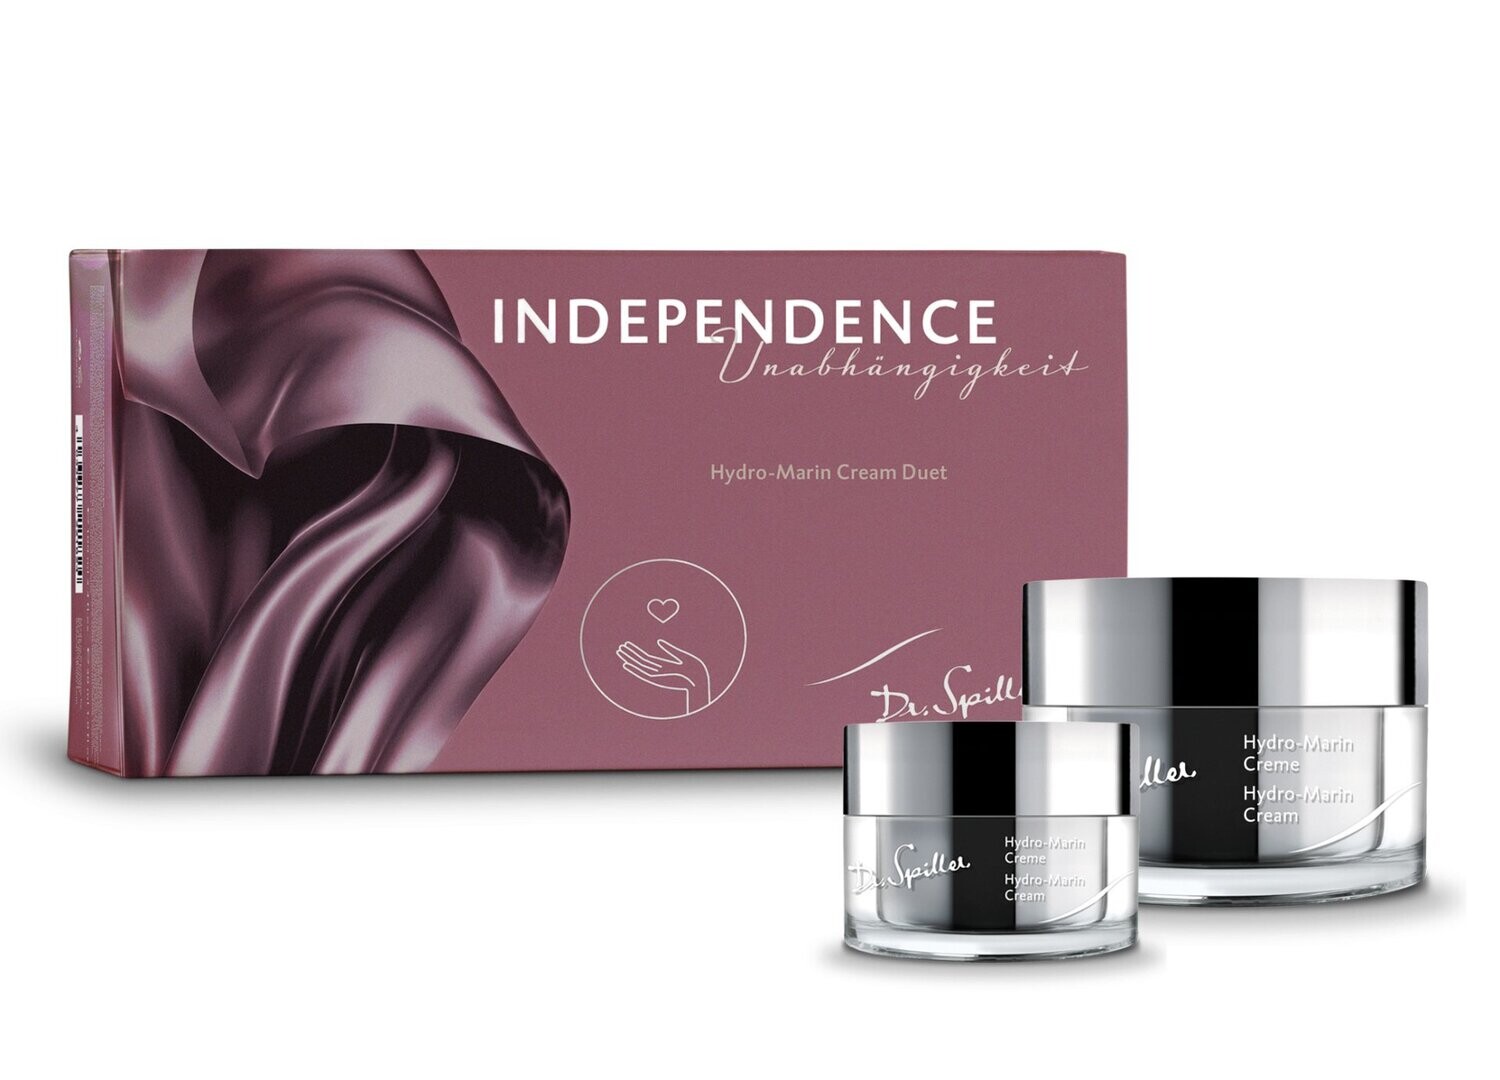 Dr. Spiller Hydro - Marin Creme - Duett independence